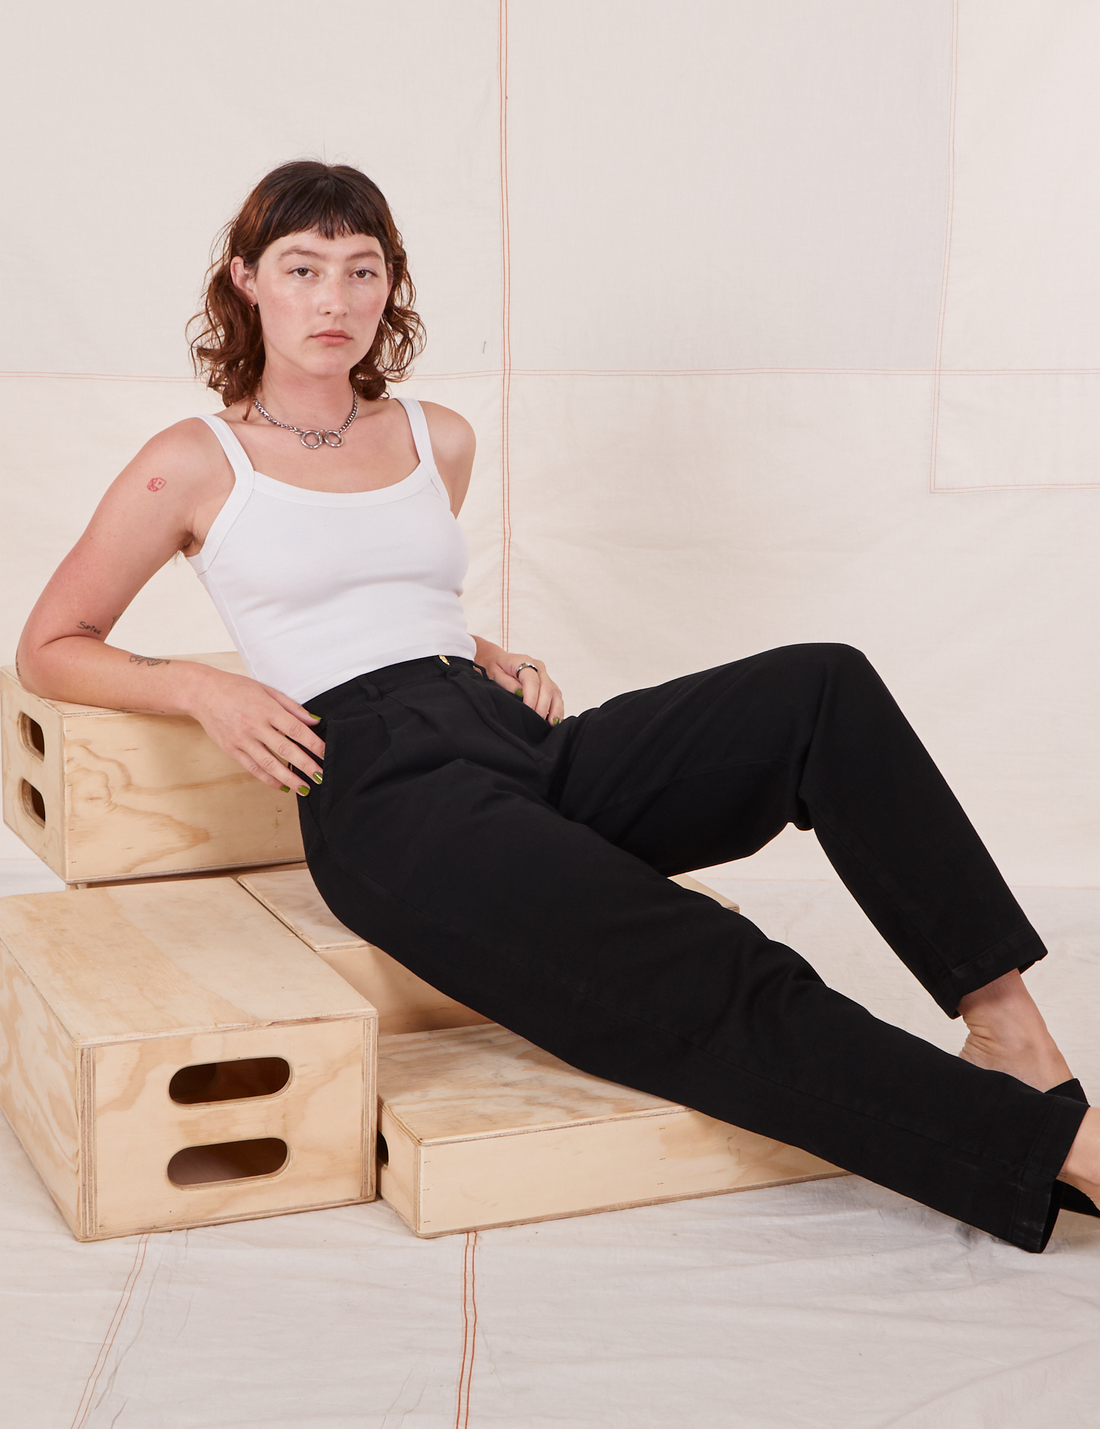 Alex is wearing Organic Trousers in Basic Black and vintage off-white Cropped Cami